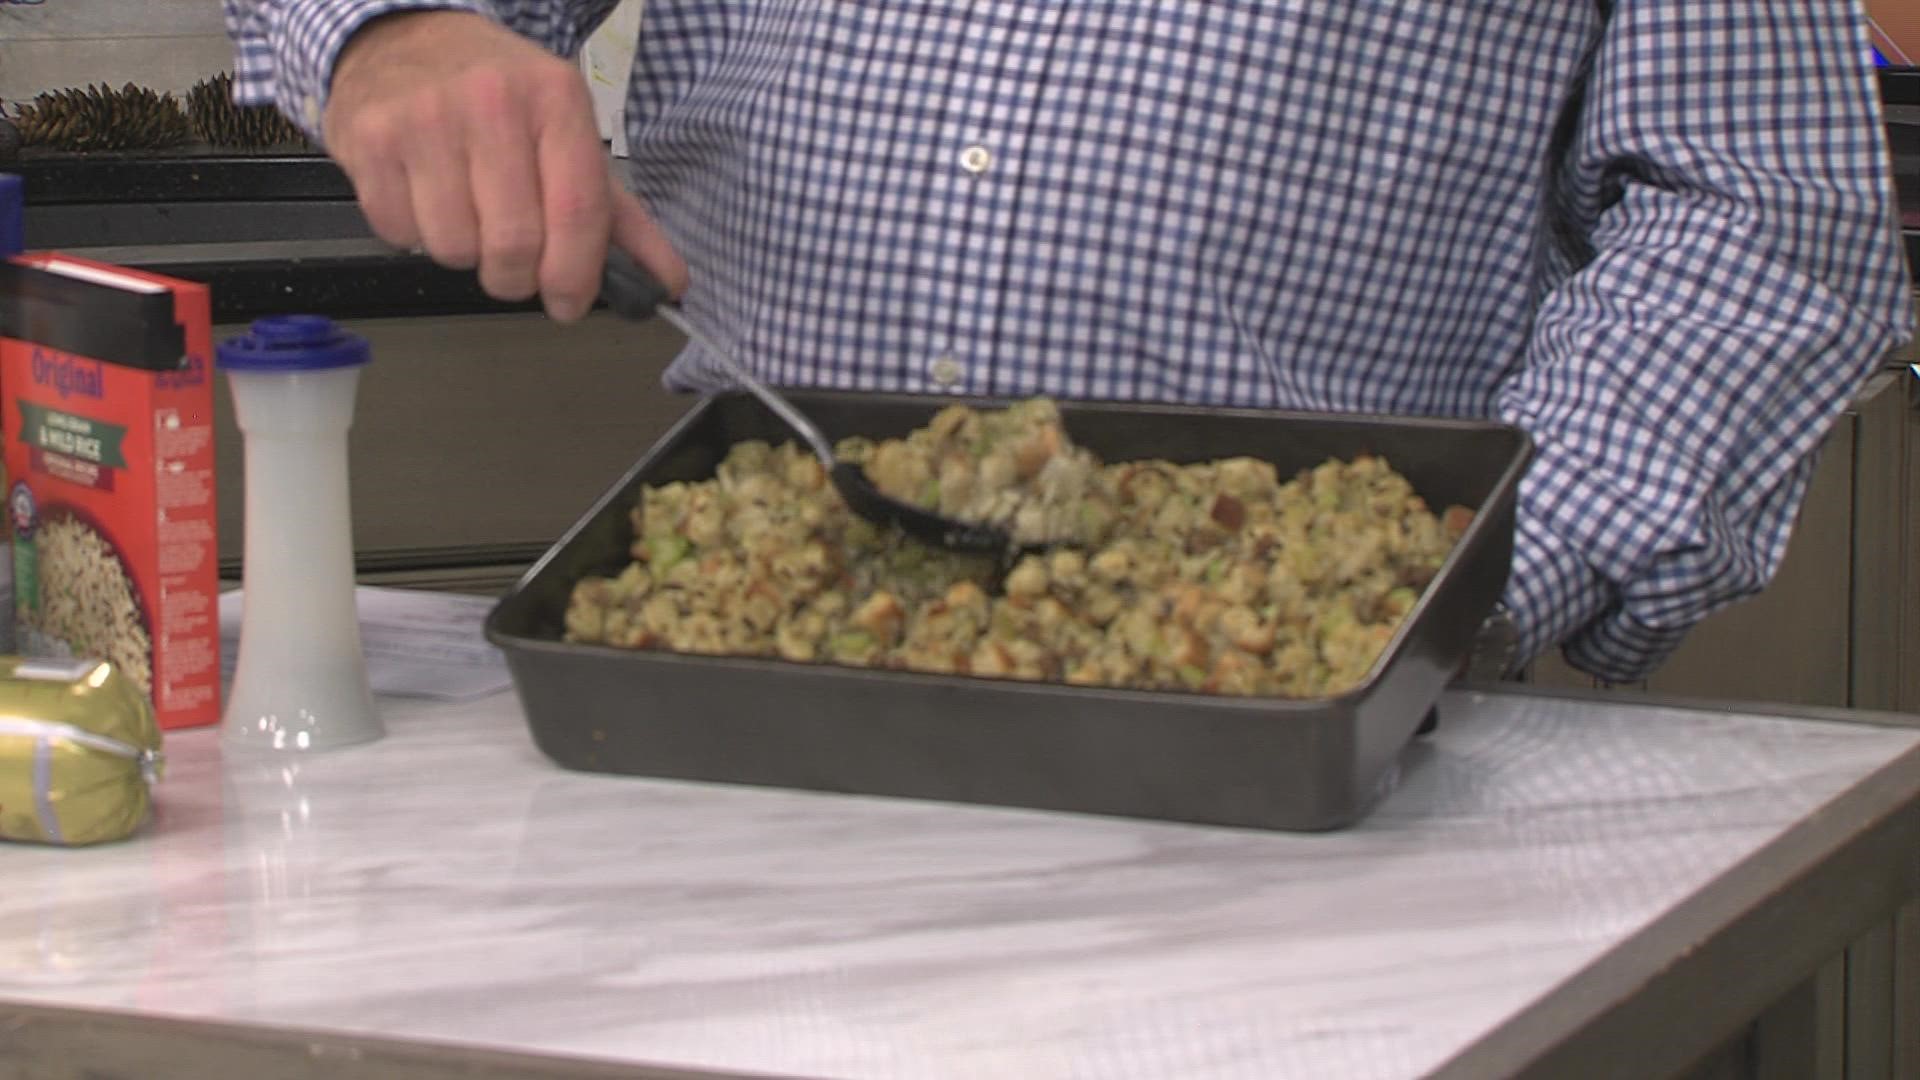 Lou recreates his mother's famous stuffing recipe from scratch.